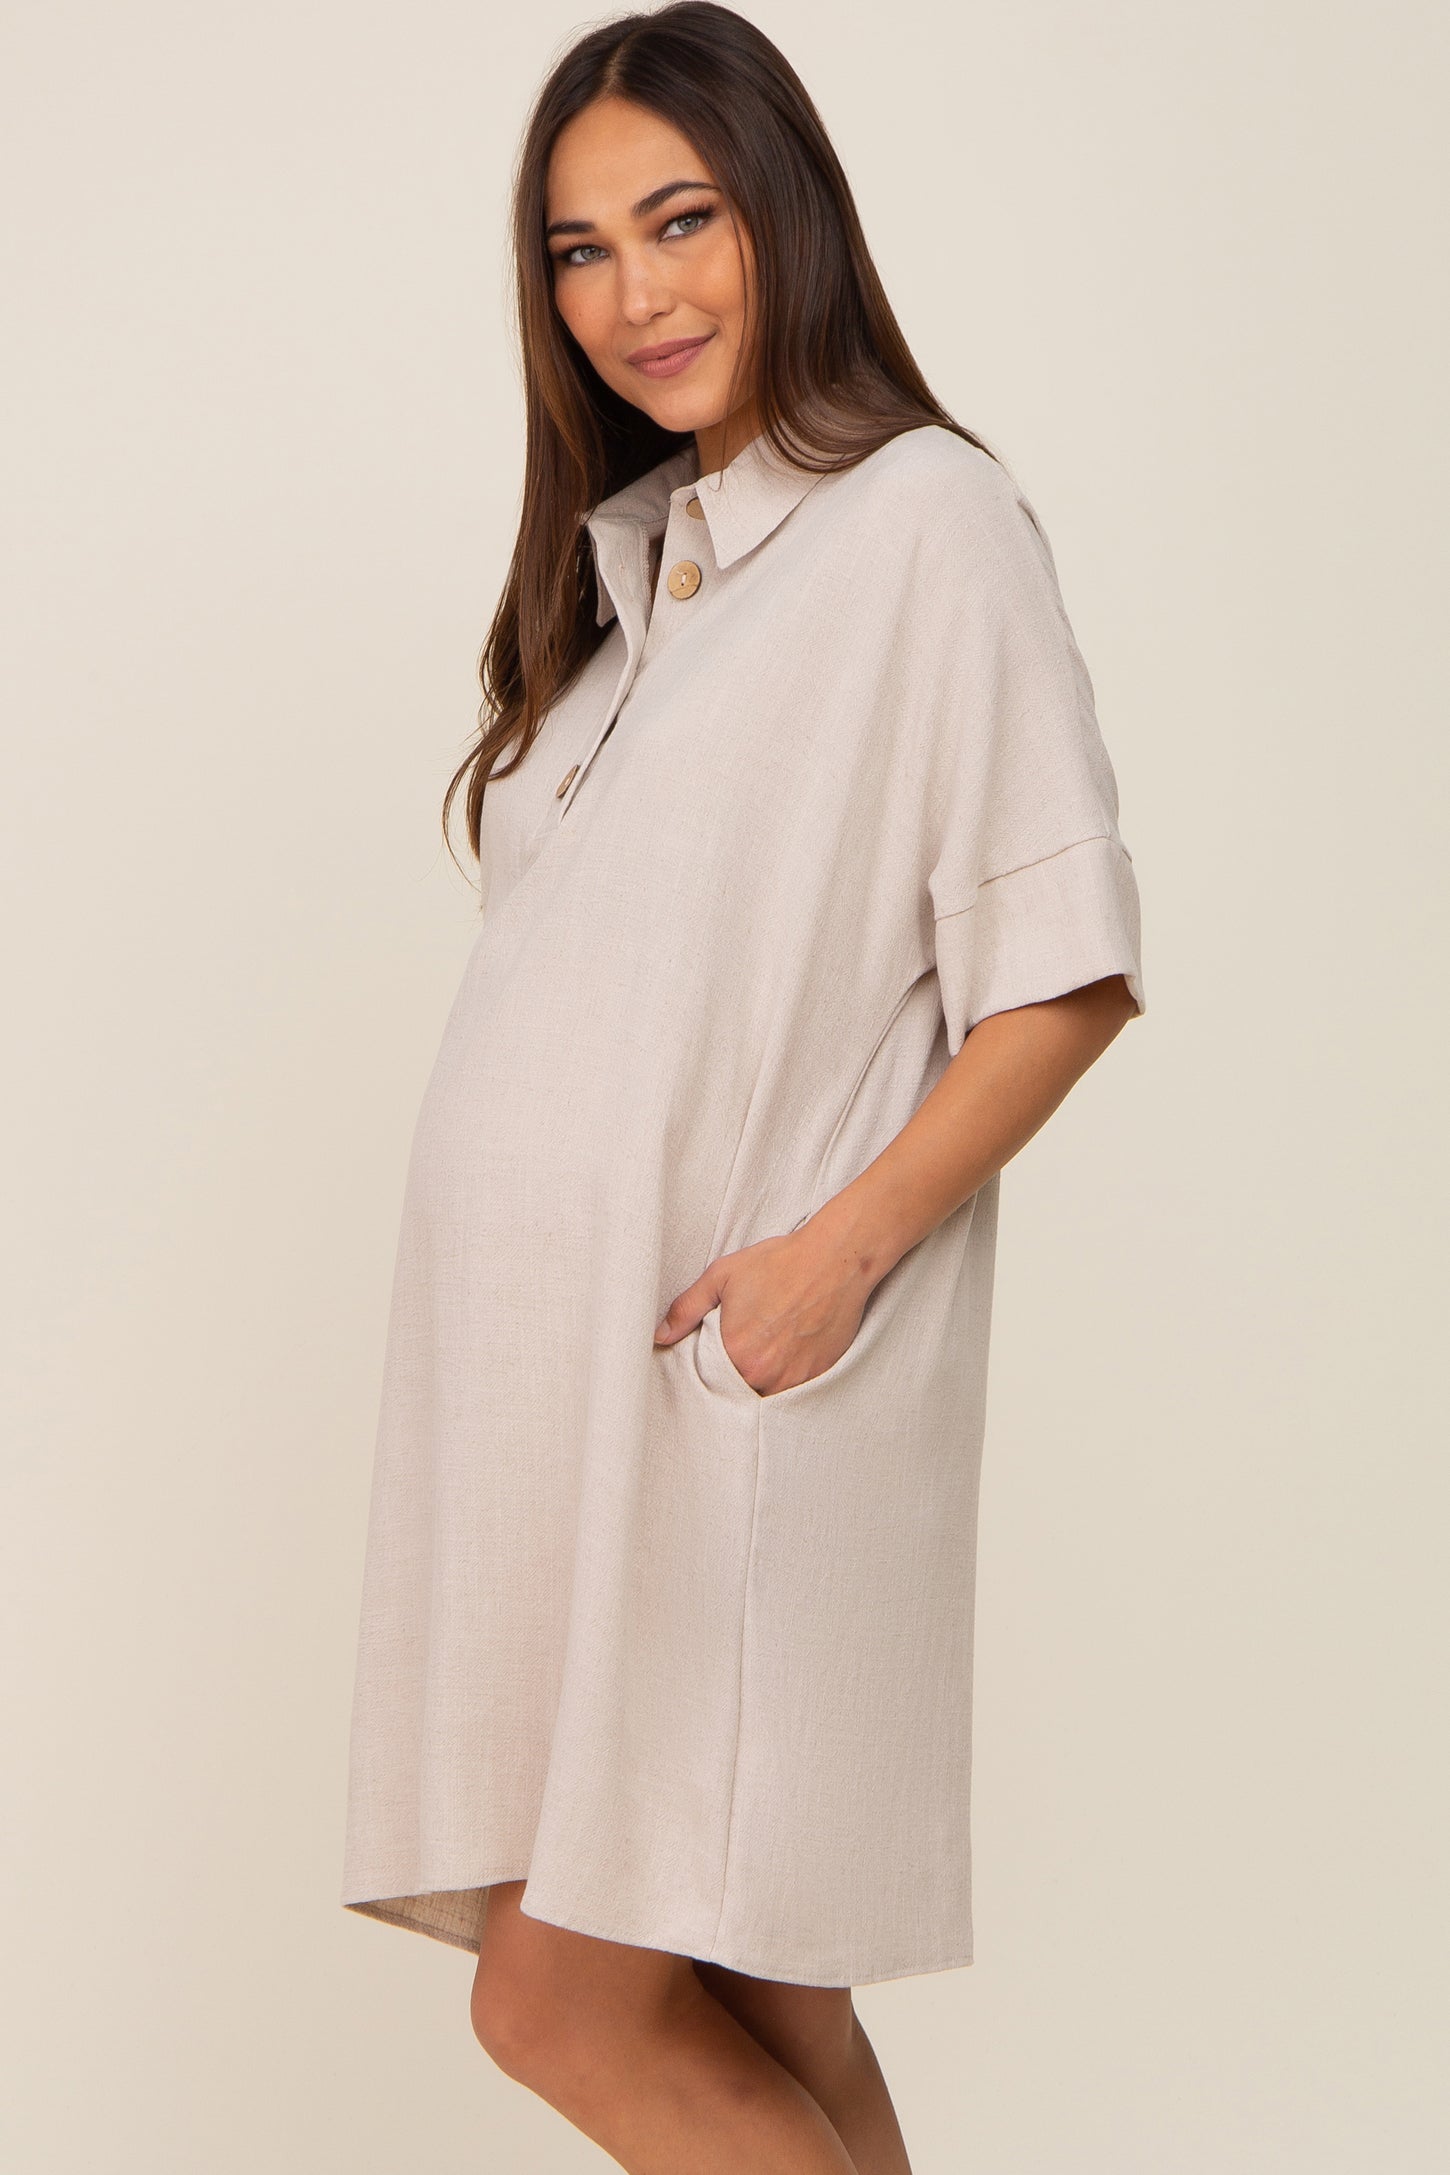 Beige Linen Front Button Collared Maternity Dress